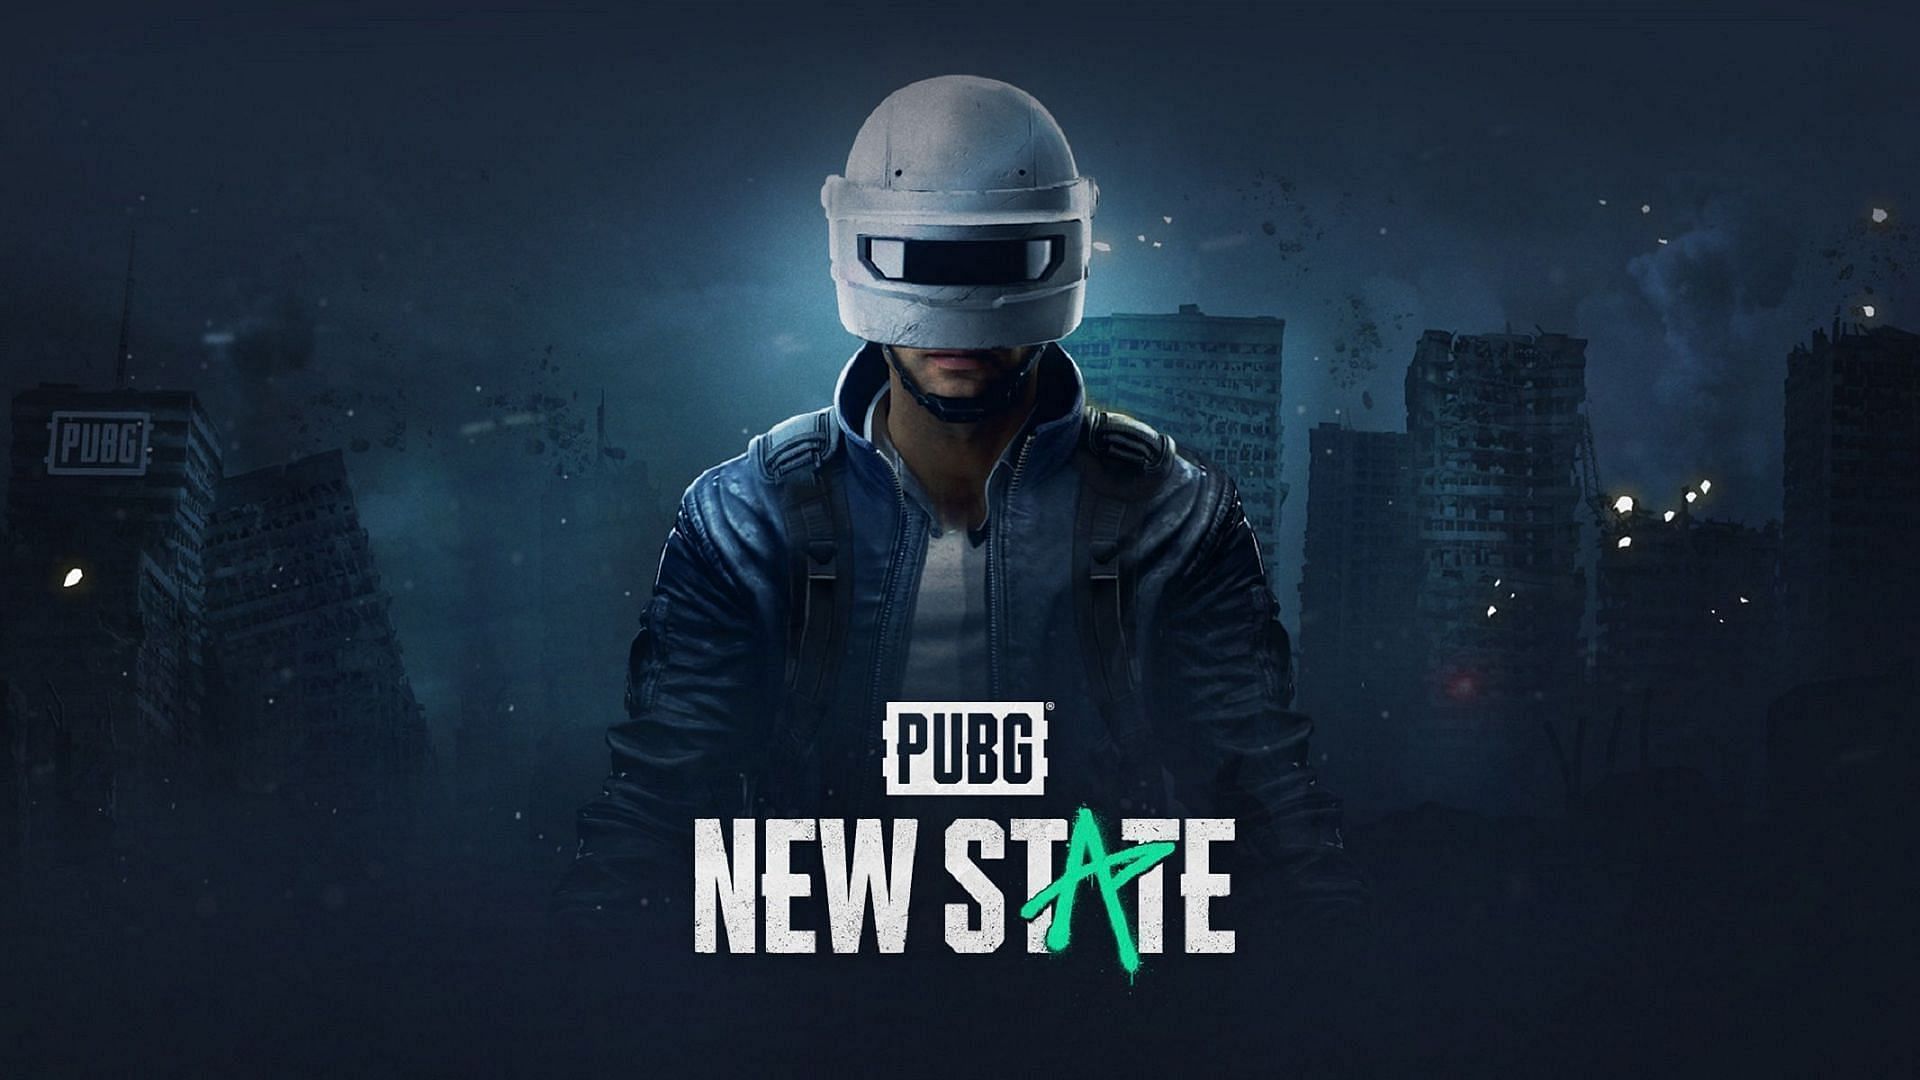 Details about PUBG New State (Image via Krafton)